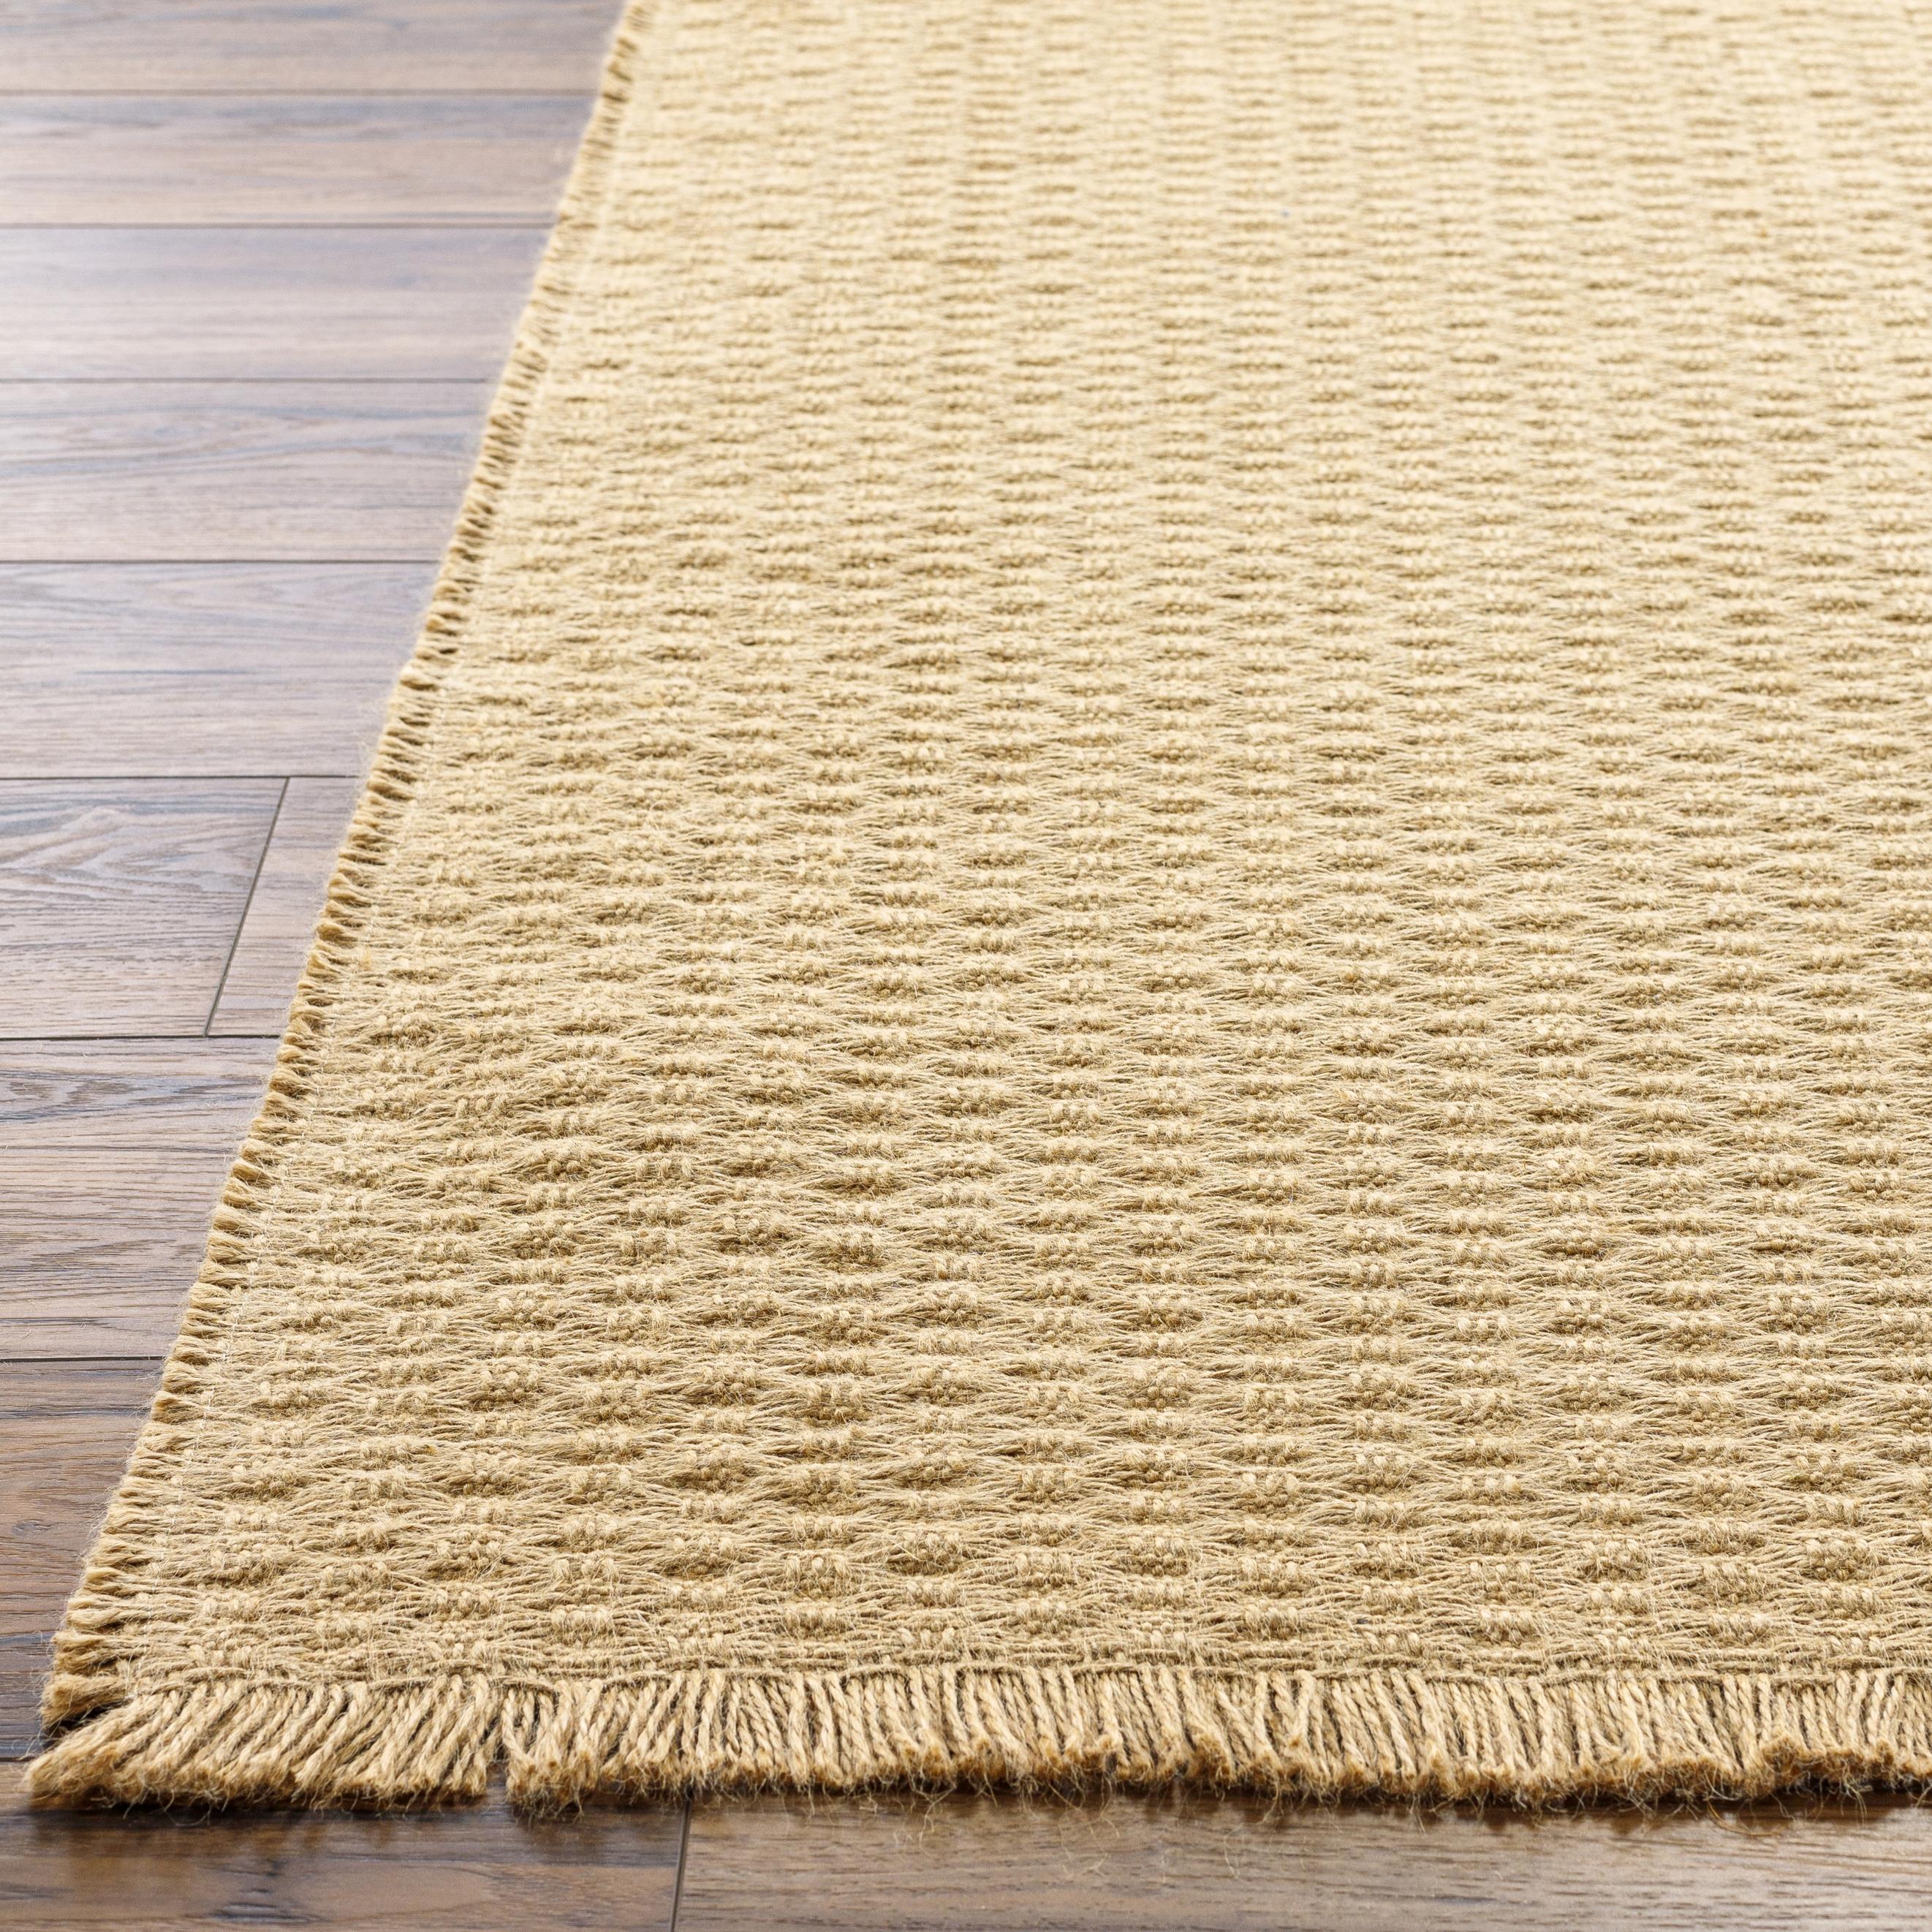 Introducing the stunning Kimi area rug – a special collaboration piece between Surya and Becki Owens. This beautiful rug is the perfect addition to any room to bring a touch of timeless elegance and style. Crafted from high-quality jute, this rug features a unique texture that adds visual interest and dimension to your space. Amethyst Home provides interior design, new home construction design consulting, vintage area rugs, and lighting in the Charlotte metro area.